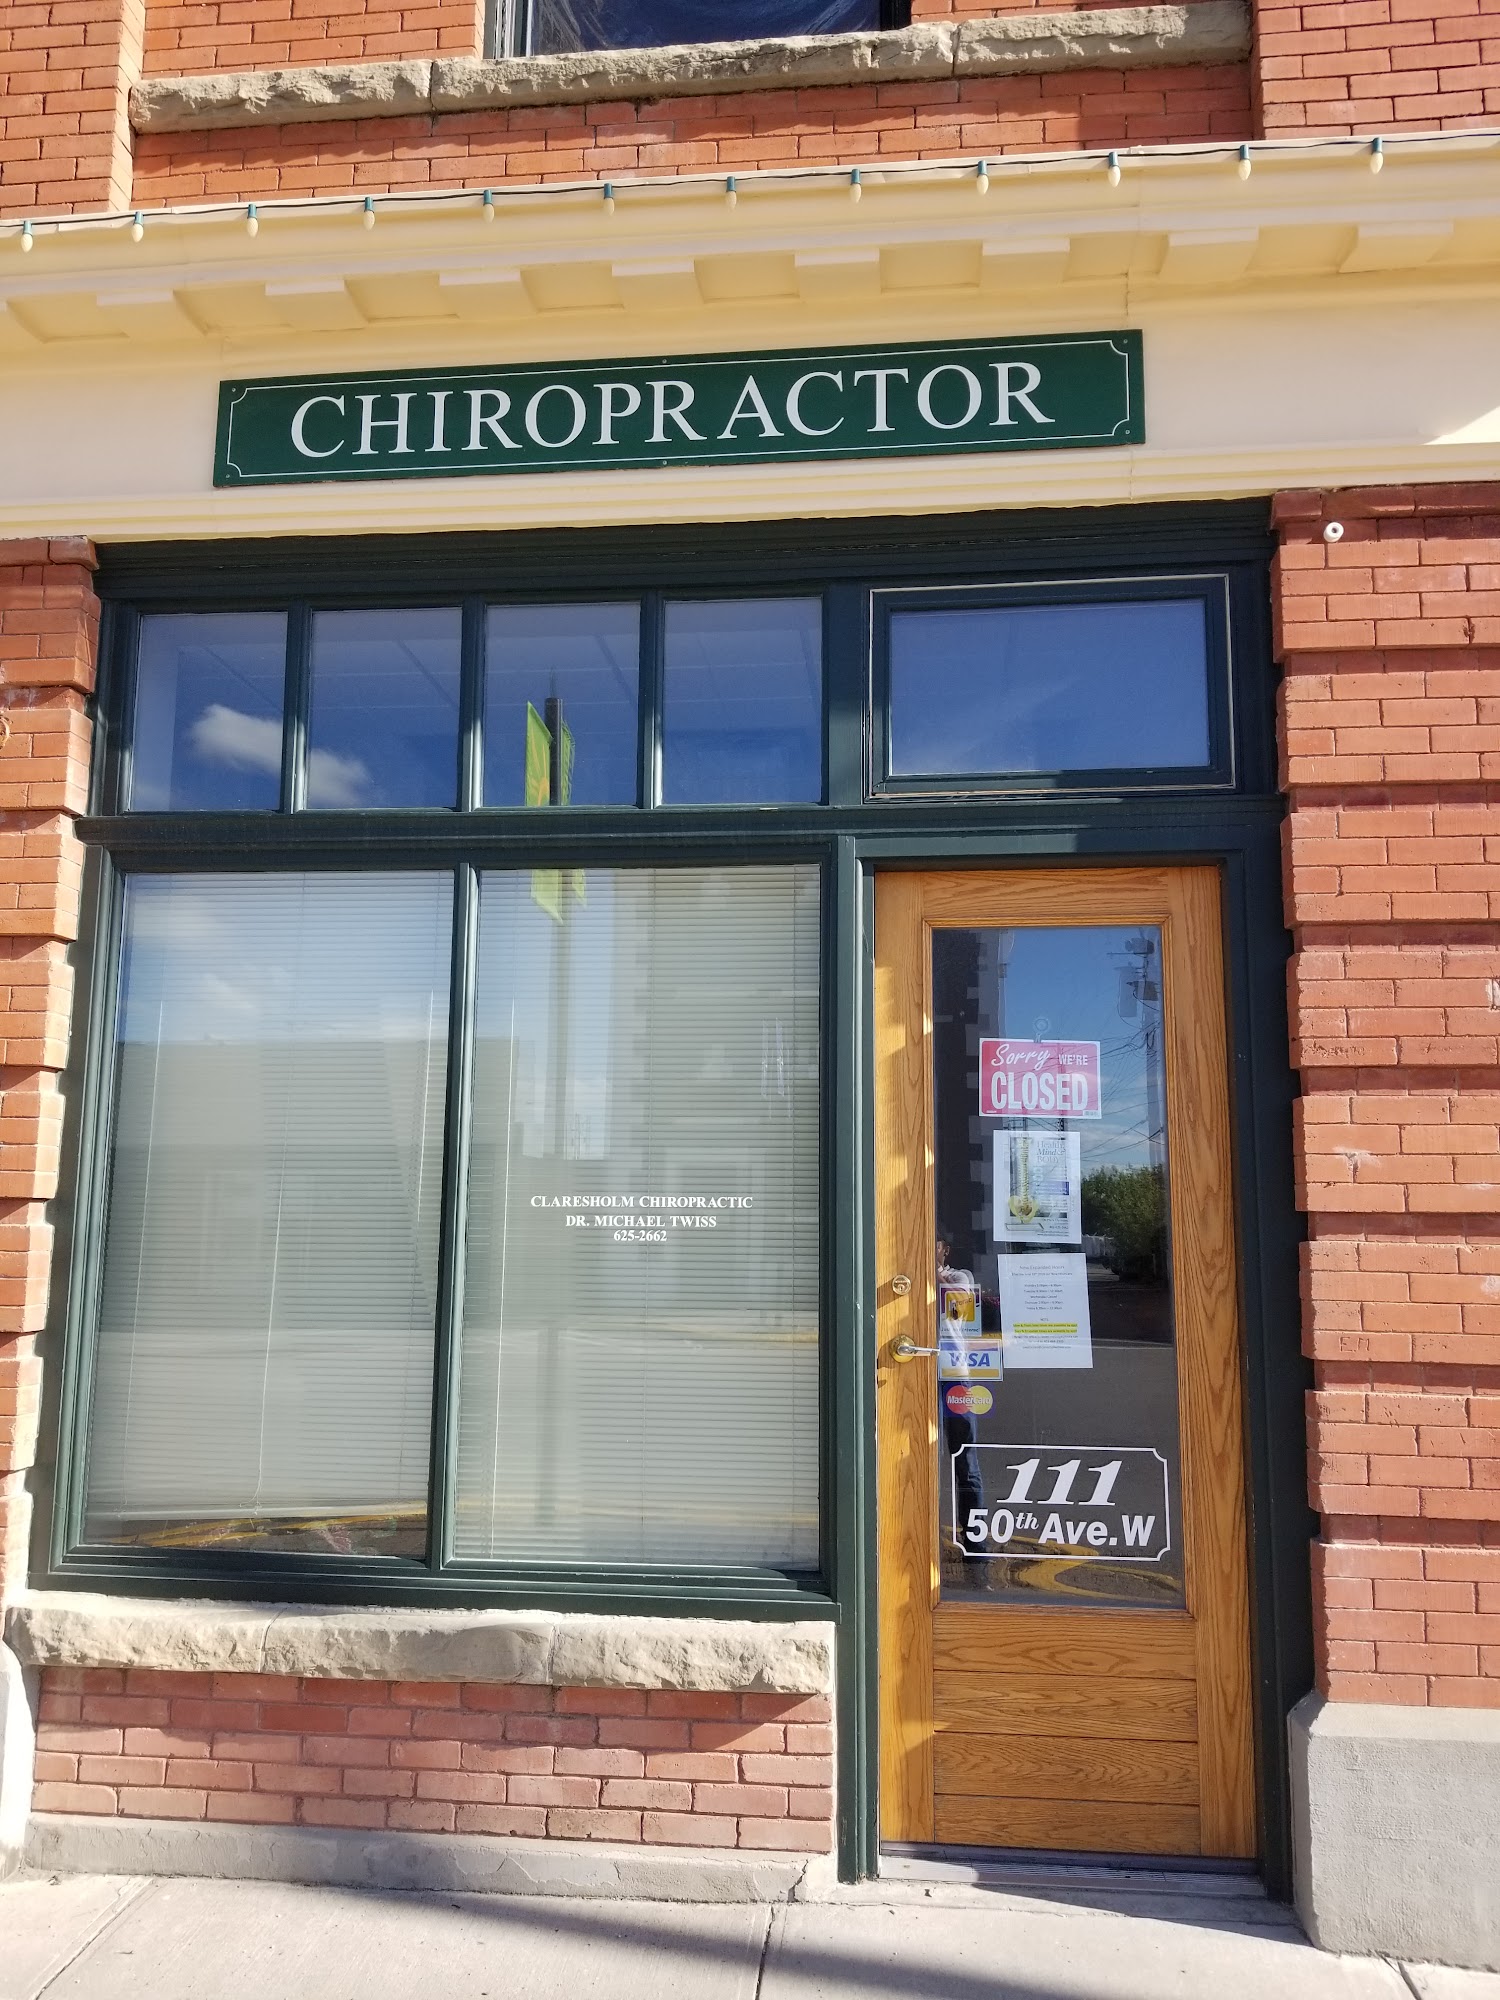 Claresholm Chiropractic Clinic 111 50 Ave W, Claresholm Alberta T0L 0T0